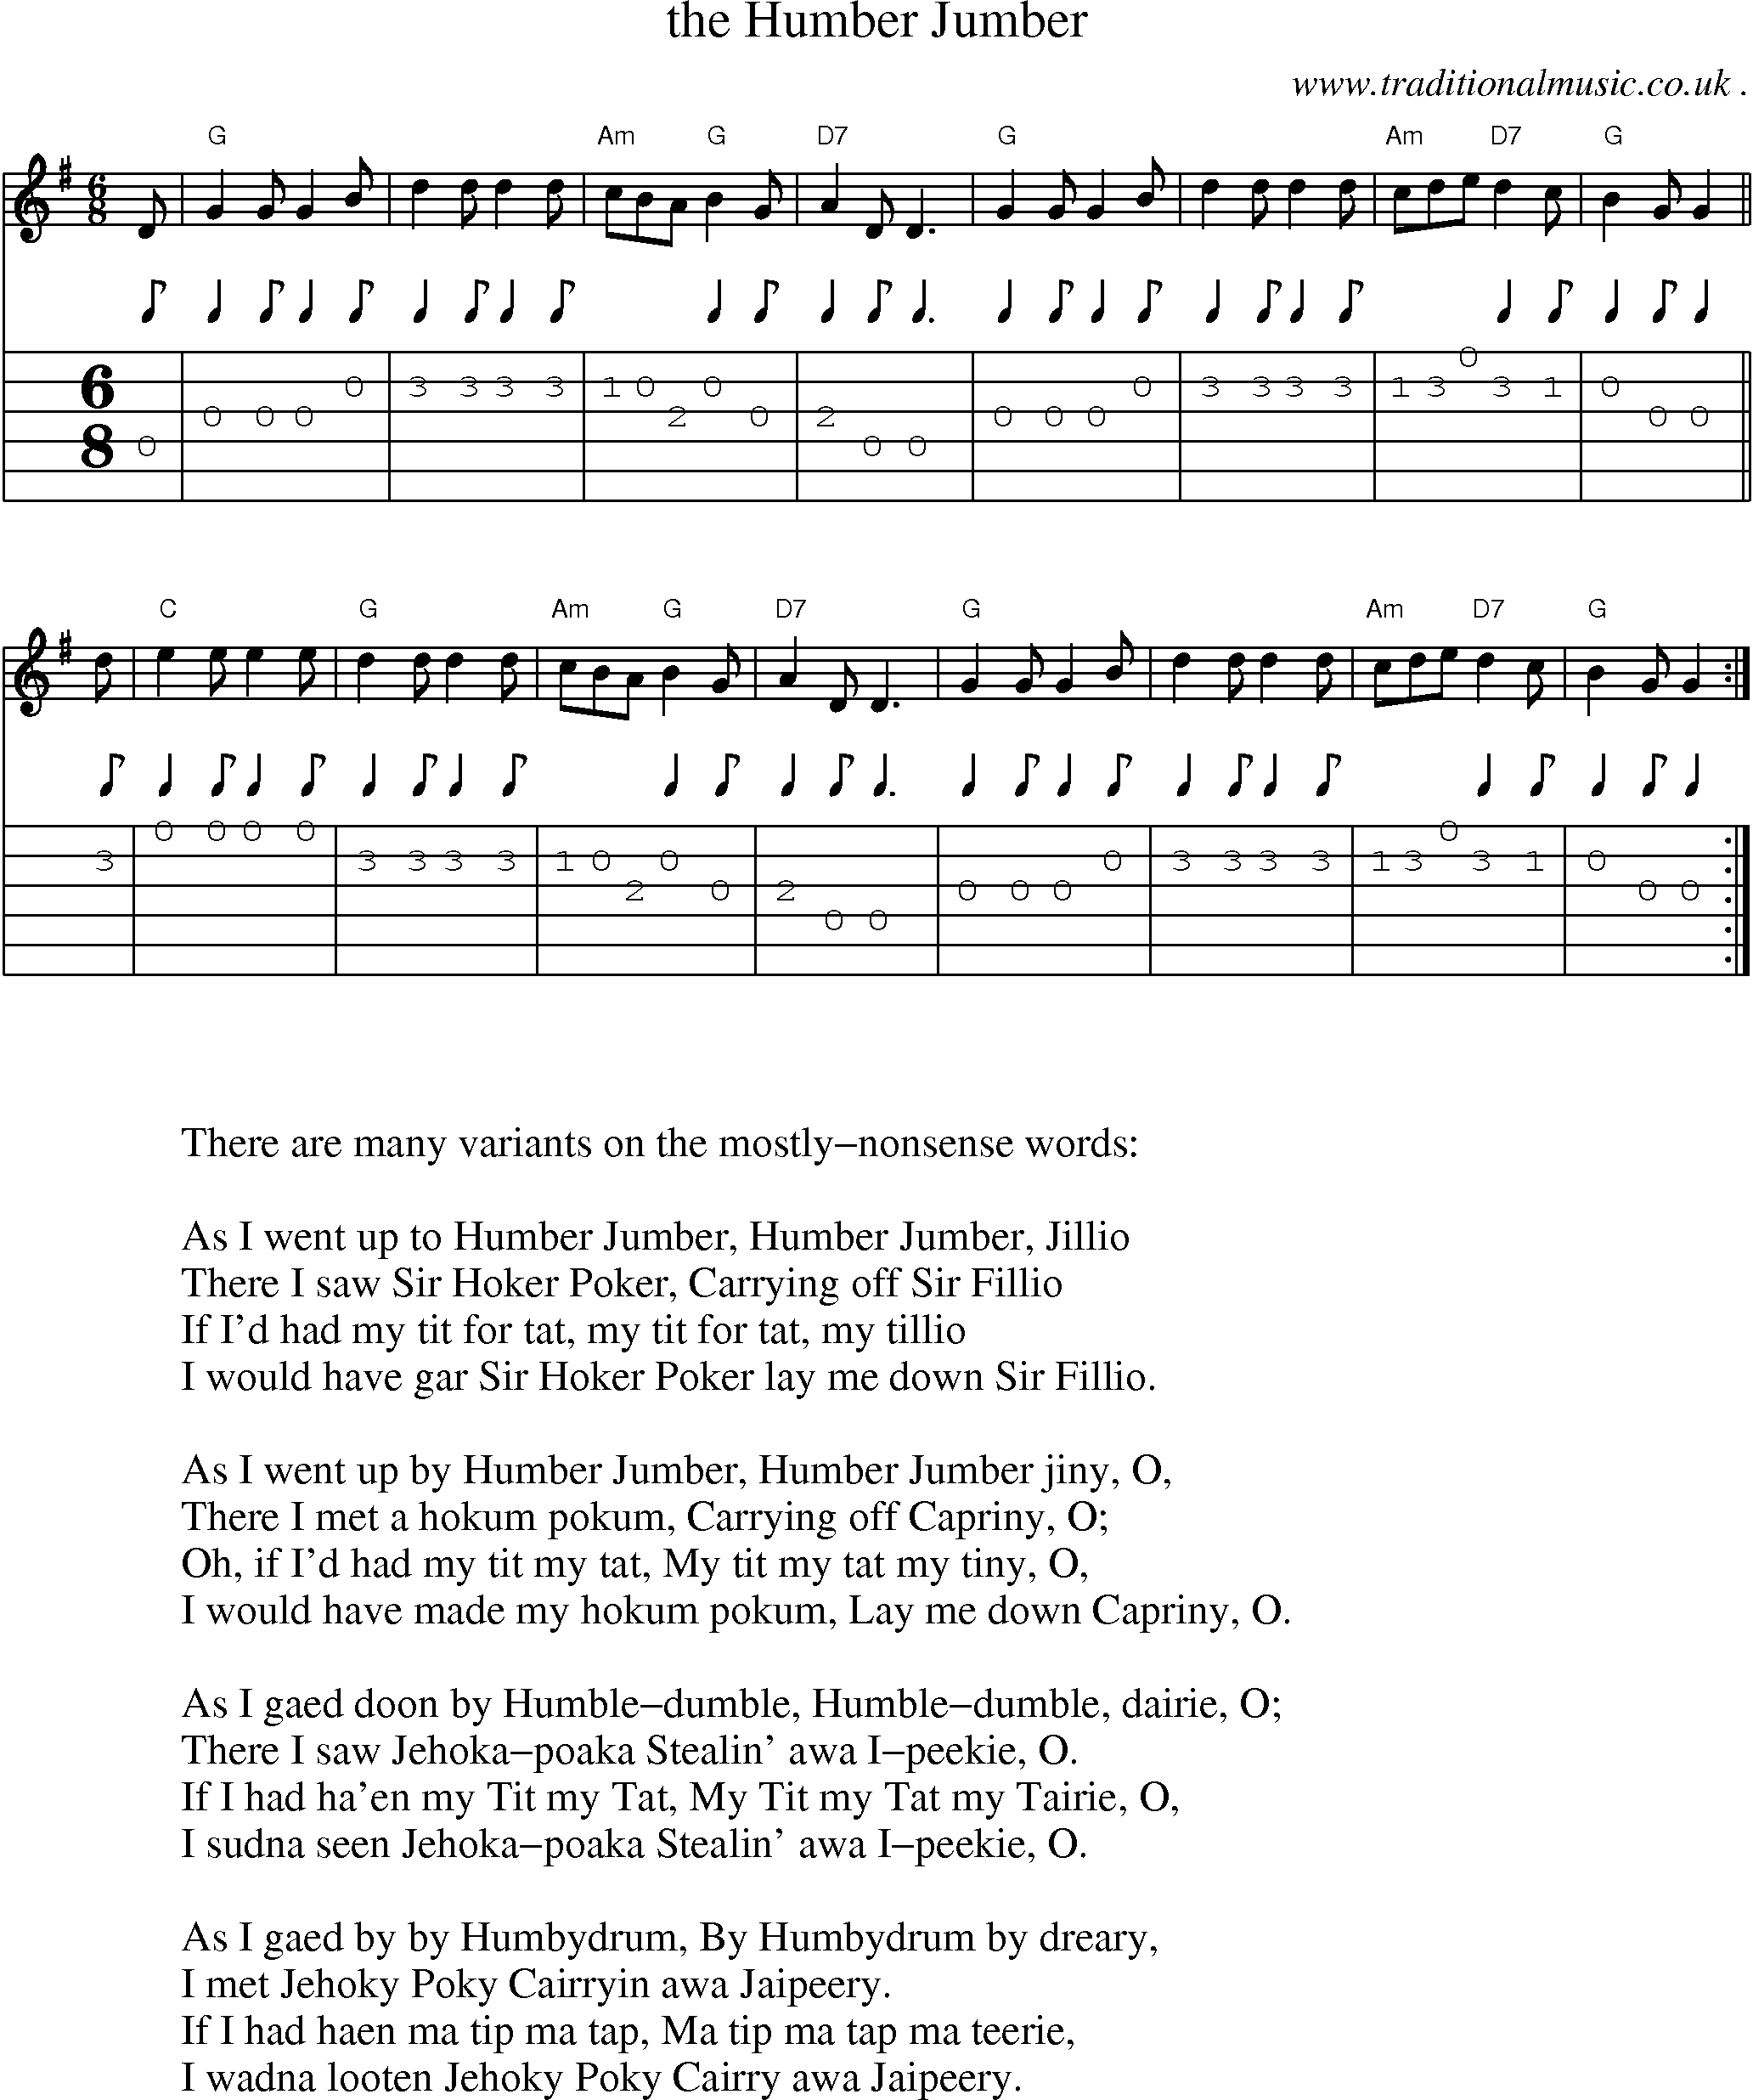 Sheet-music  score, Chords and Guitar Tabs for The Humber Jumber